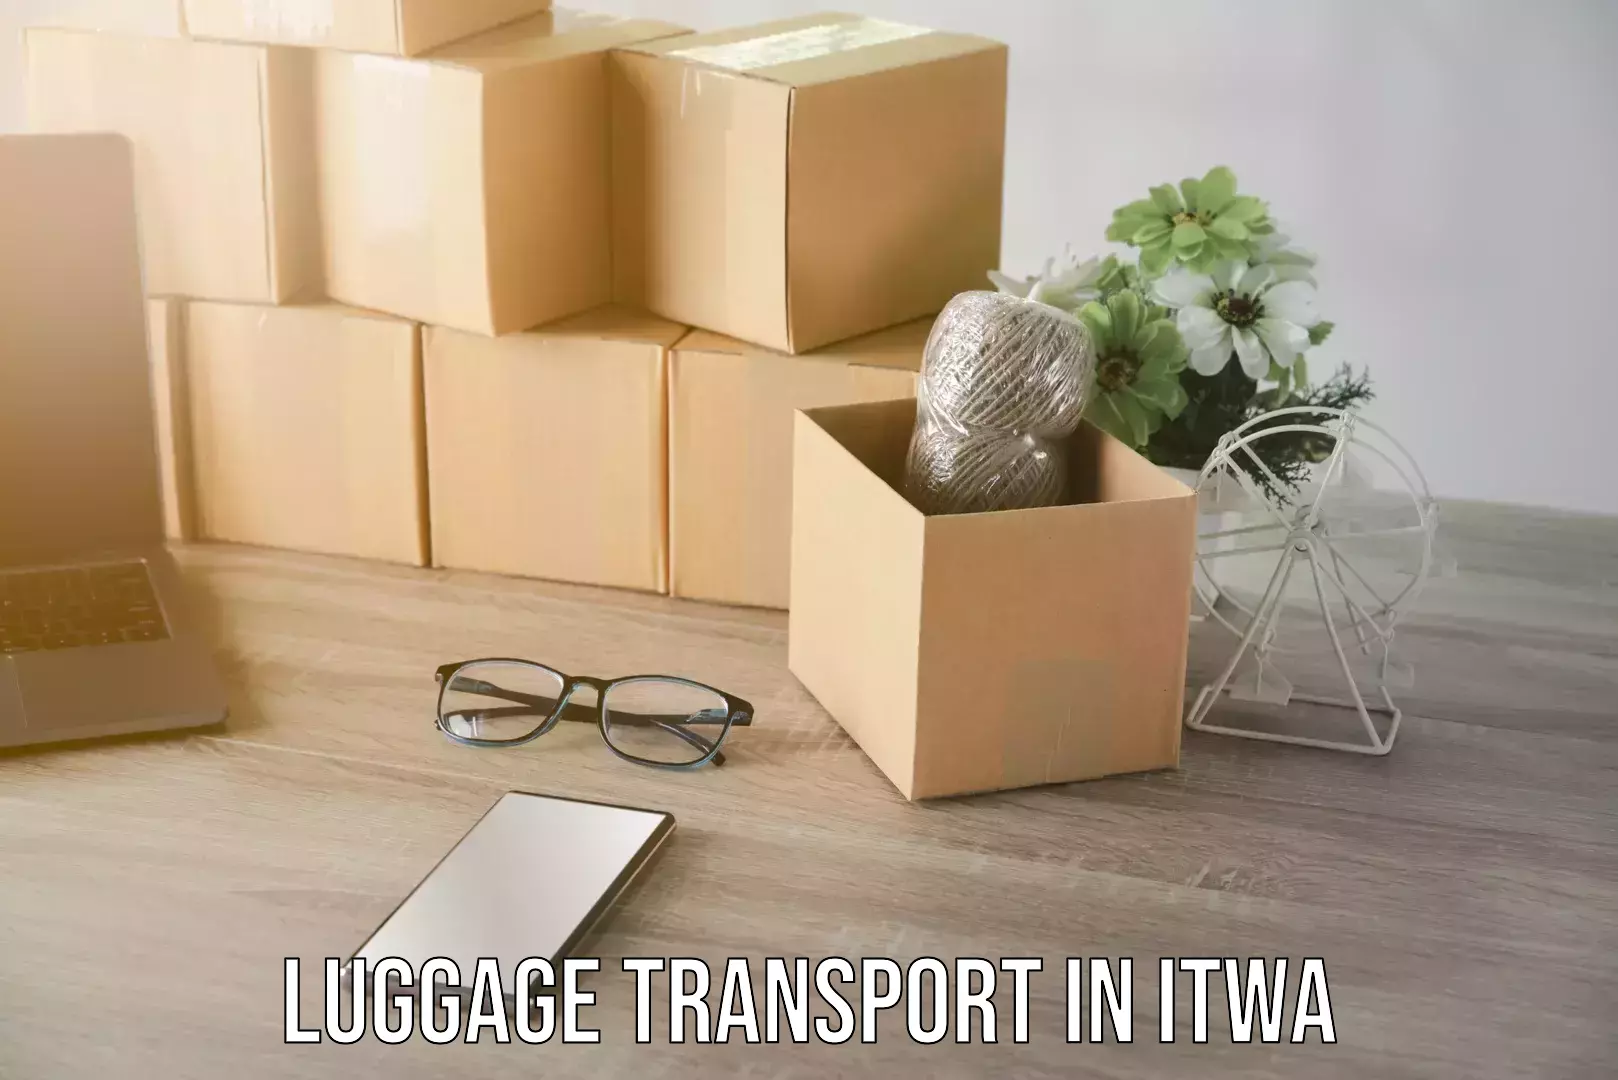 Baggage transport scheduler in Itwa